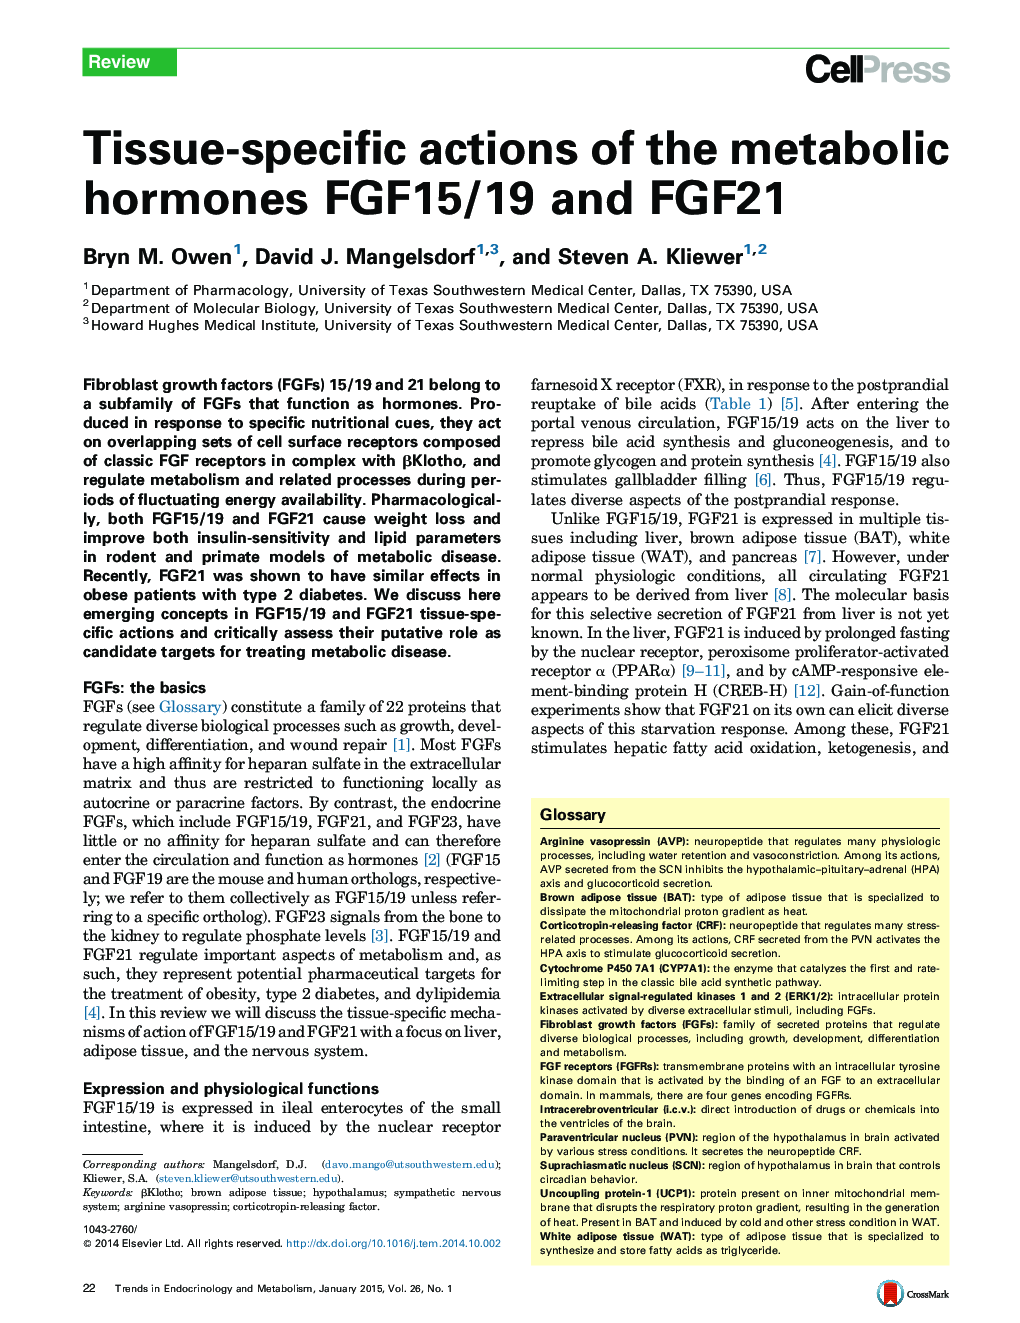 Tissue-specific actions of the metabolic hormones FGF15/19 and FGF21